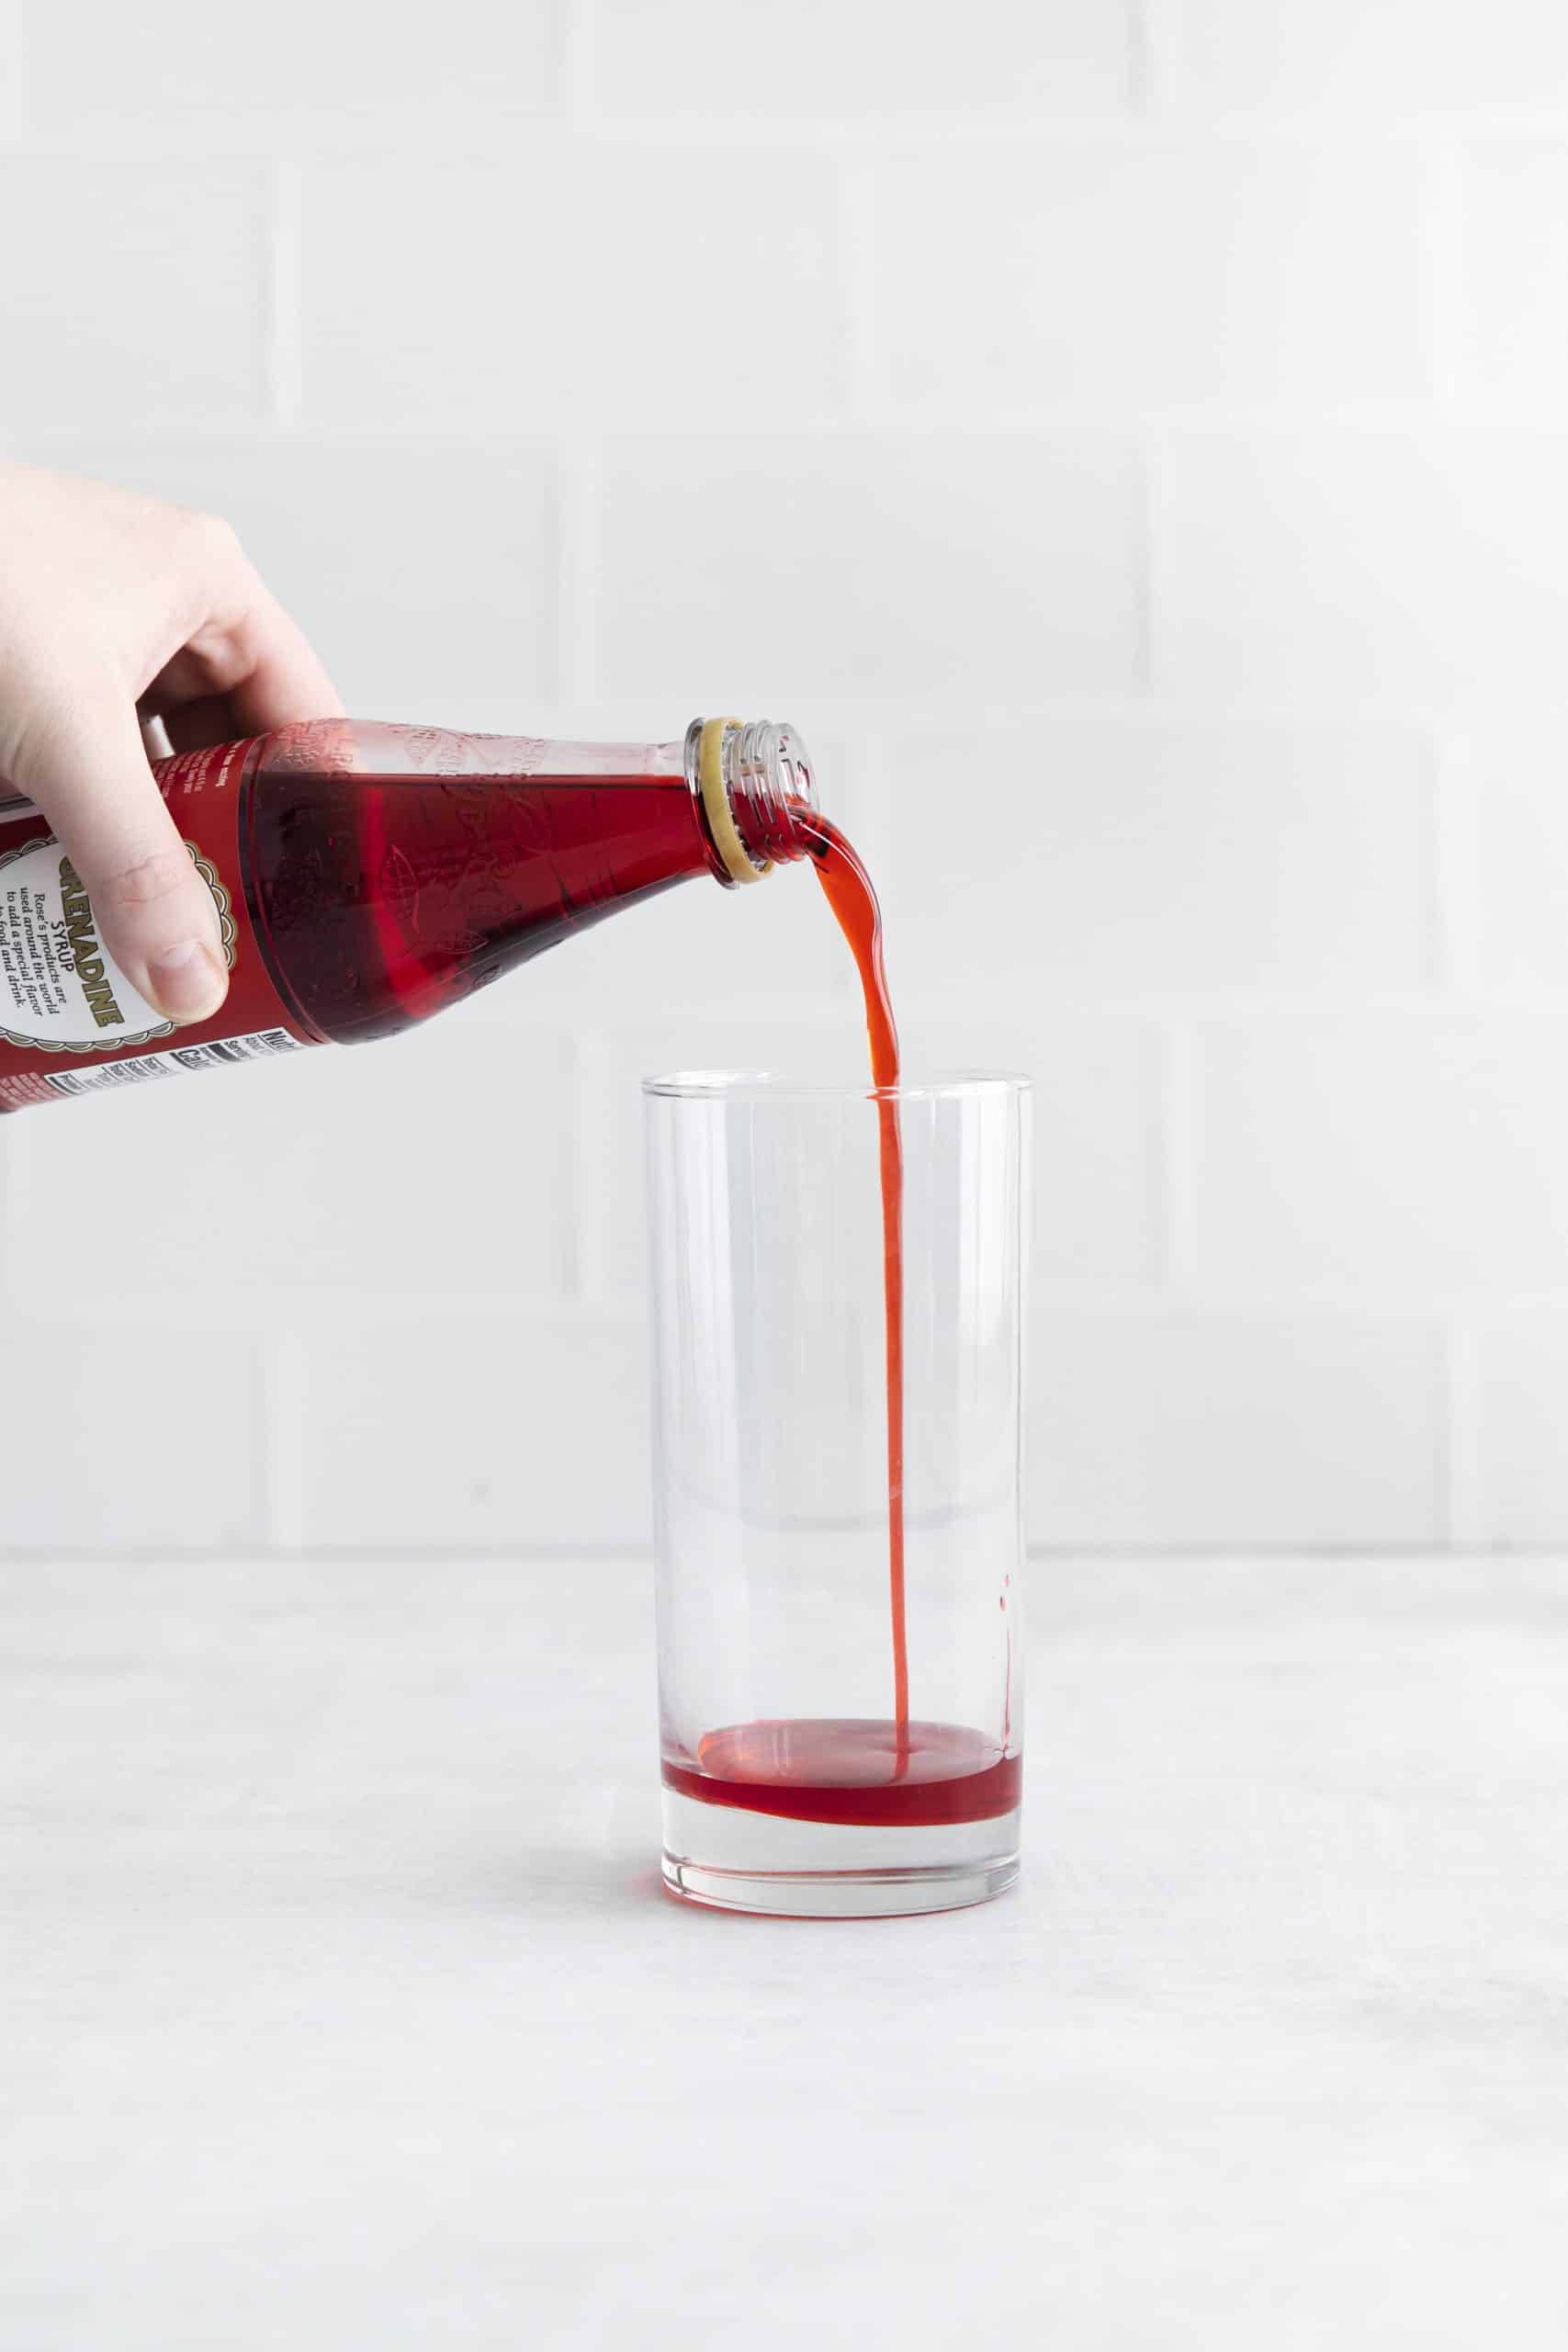 red liquid being poured into a glass